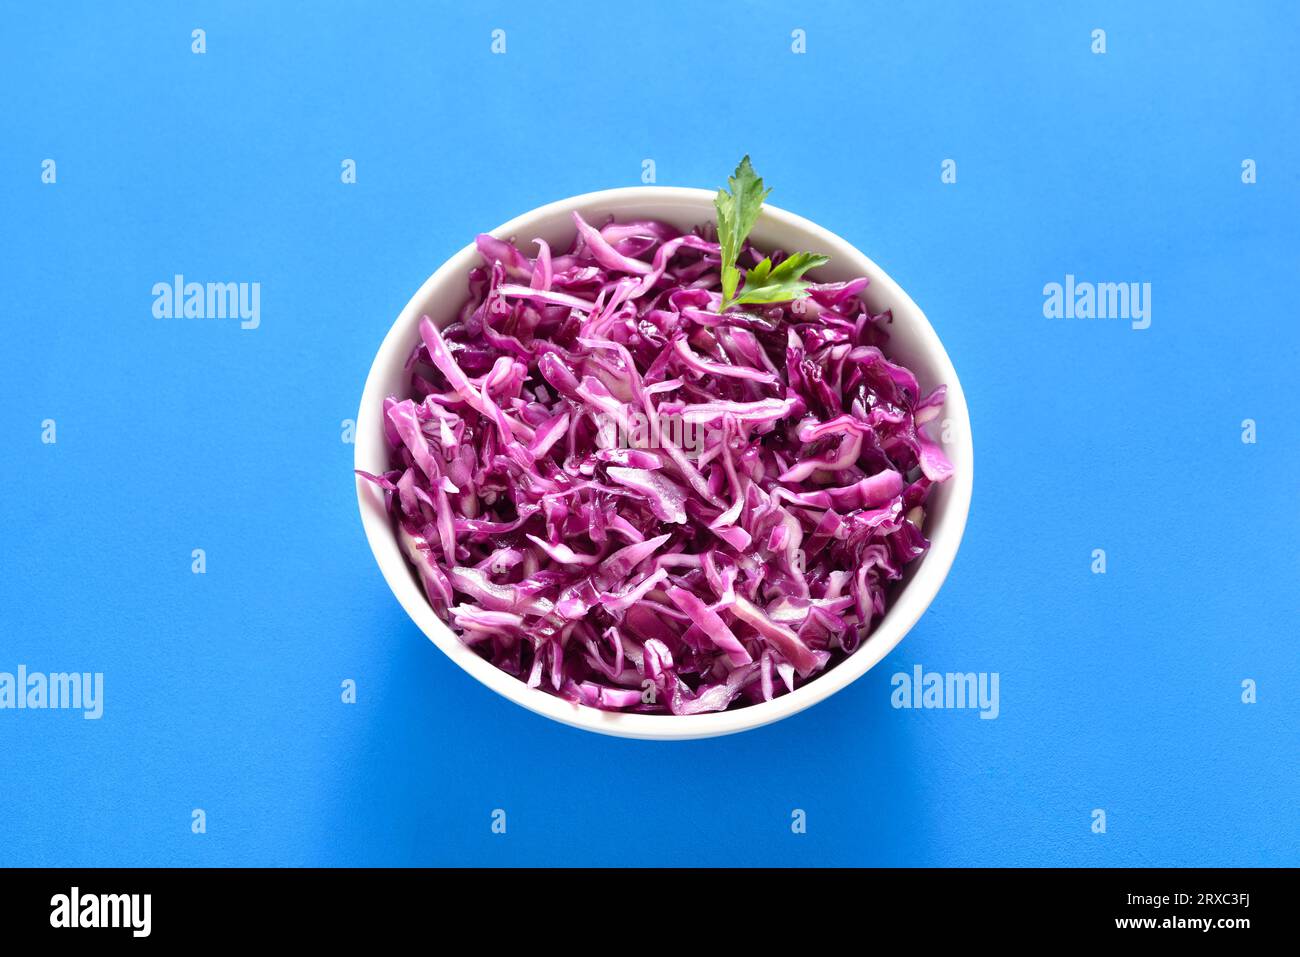 Red cabbage in bowl on blue background. Close up view Stock Photo